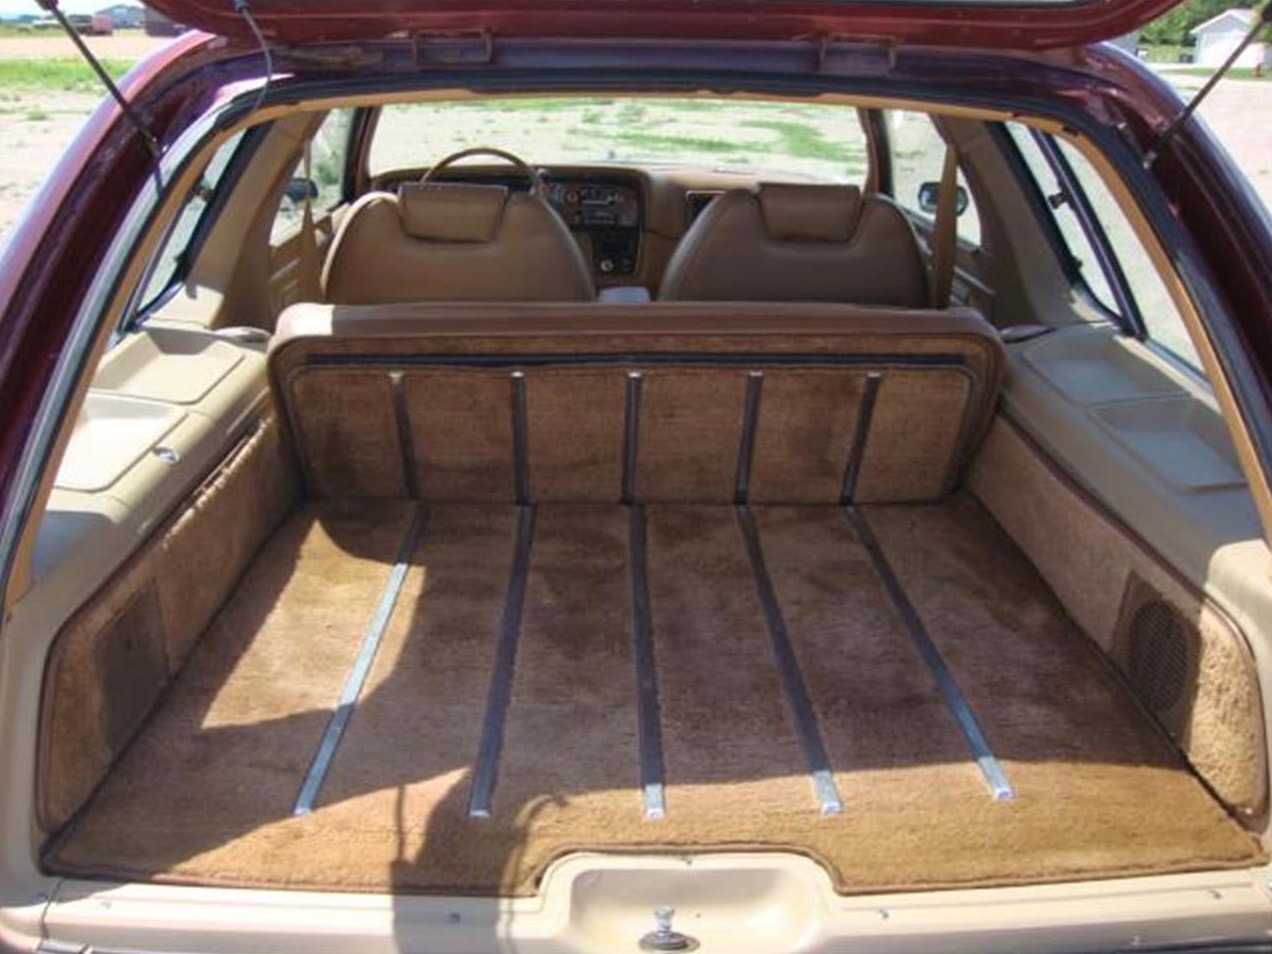 1977 AMC Pacer, Pacesetter? In 1977 AMC added station wagon room to its Pacer, ClassicCars.com Journal